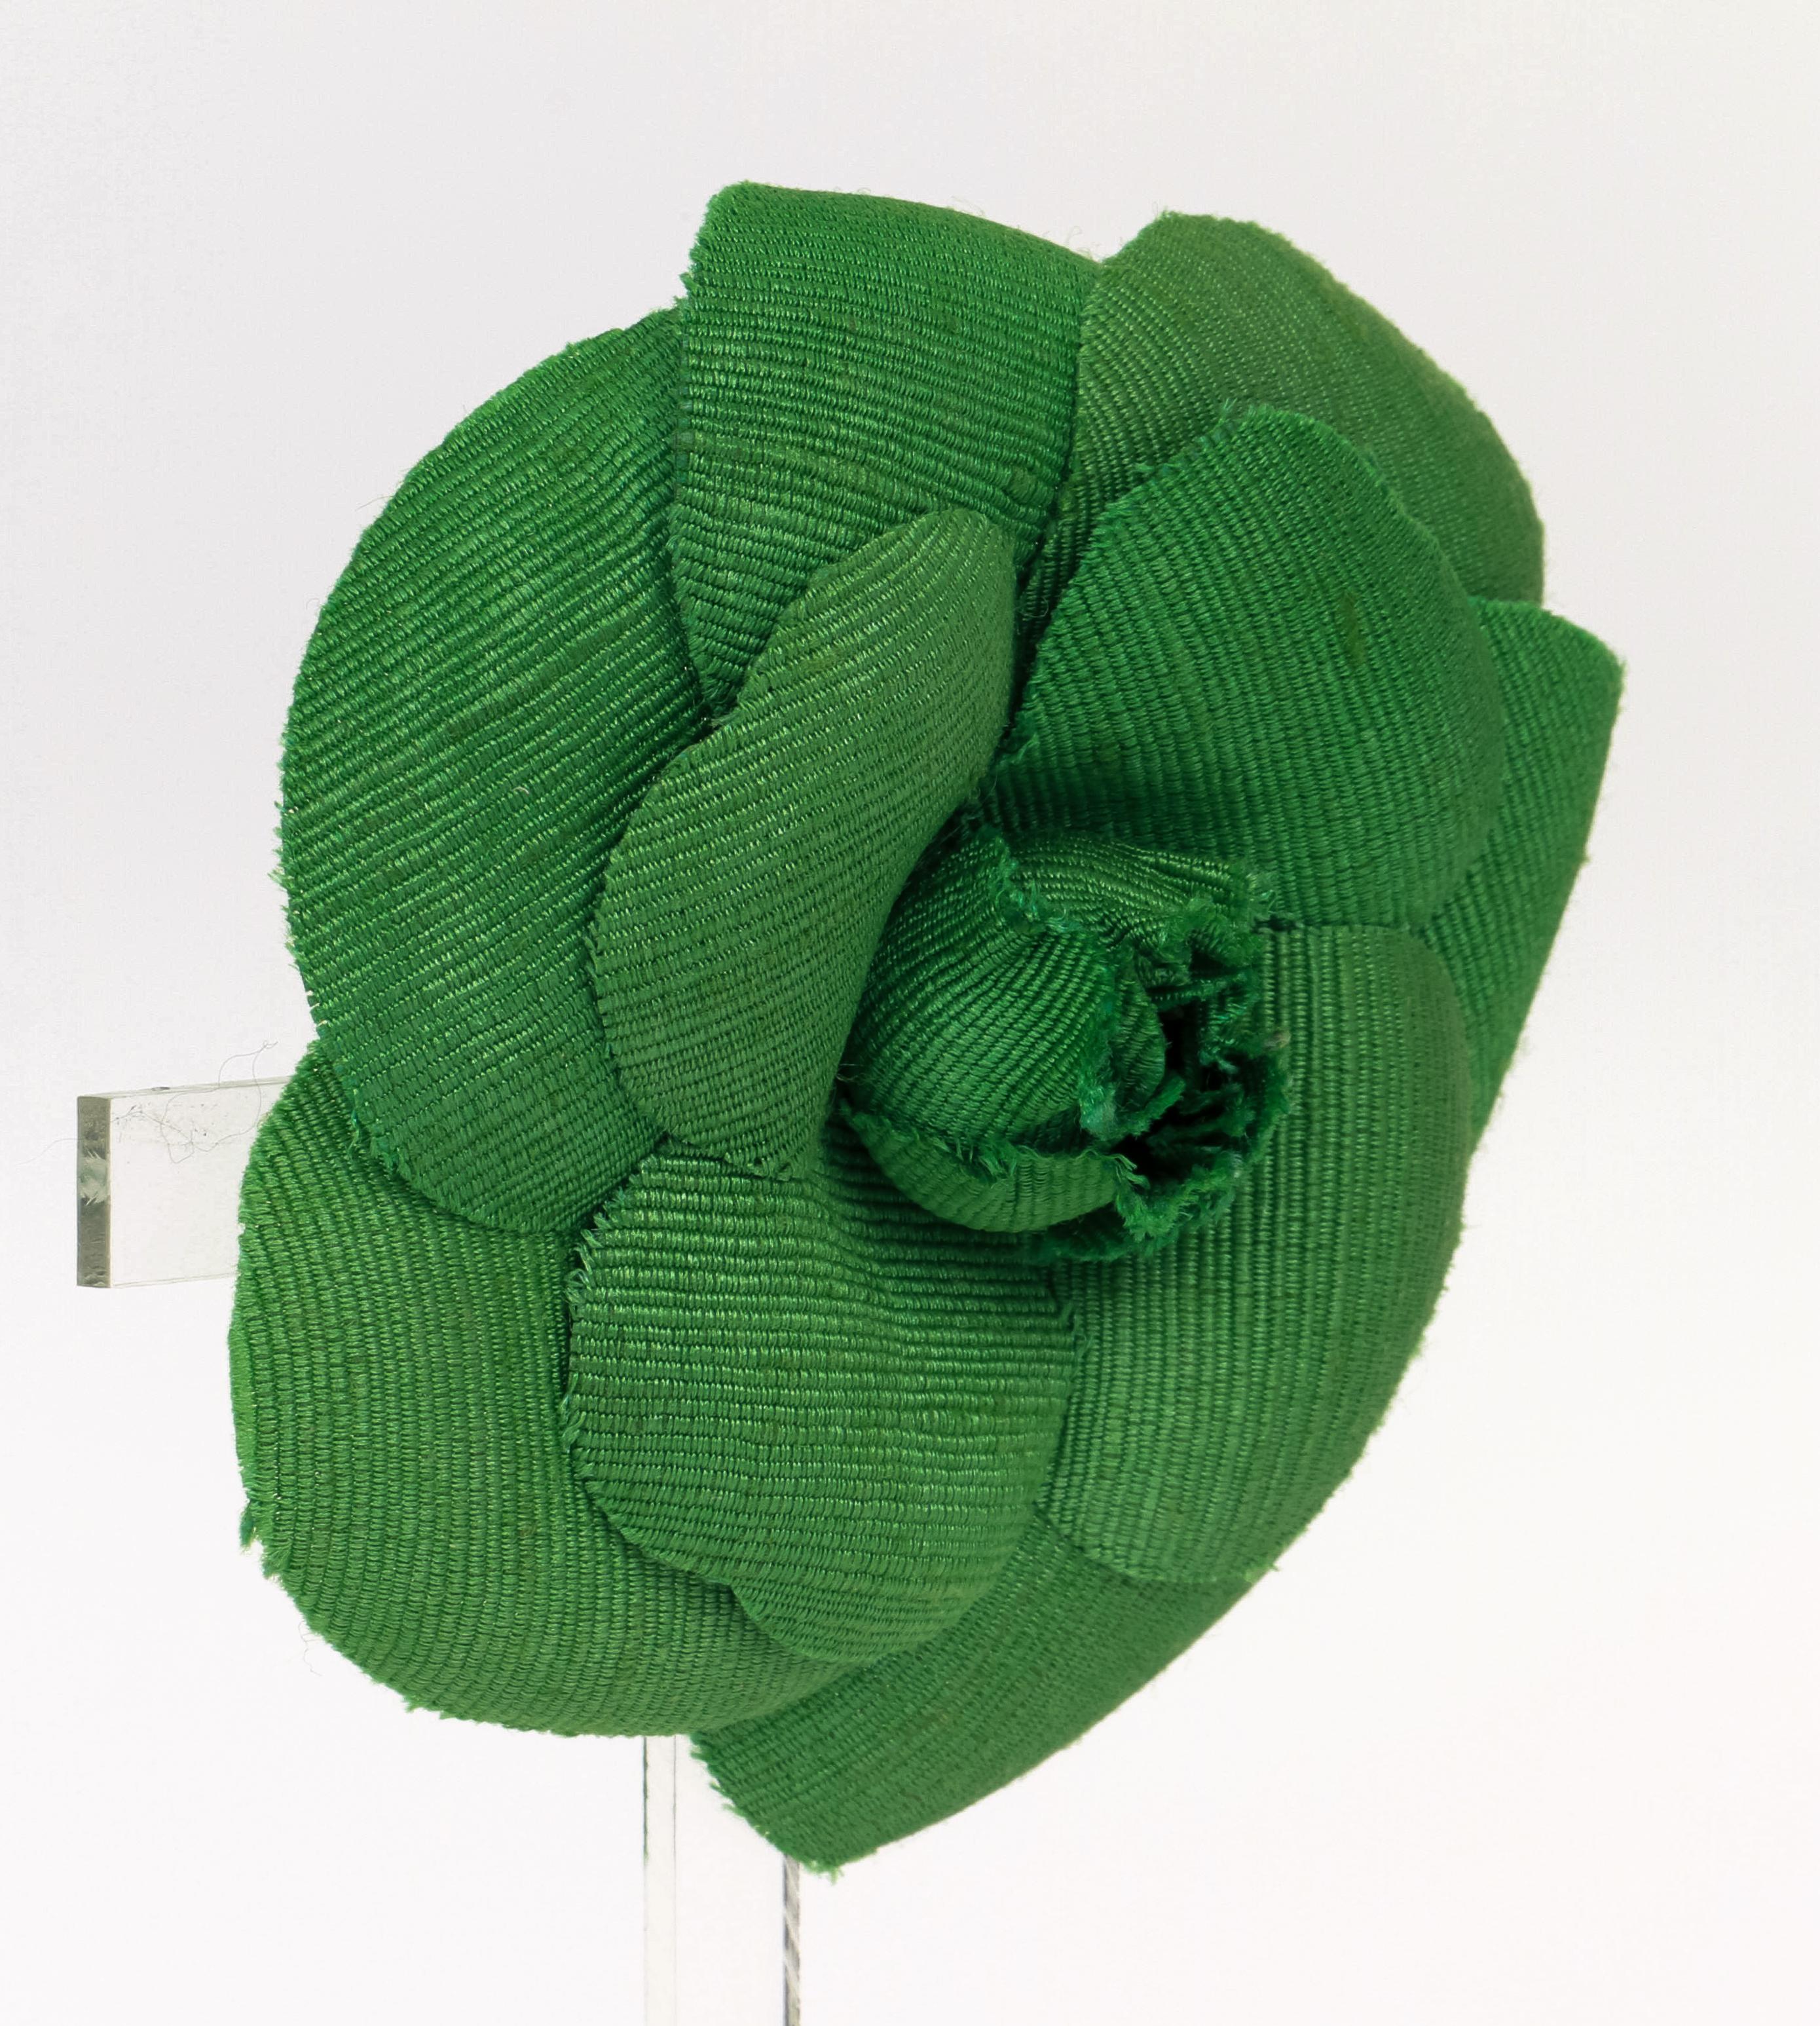 Chanel large green fabric camellia brooch. Comes with velvet pouch.
